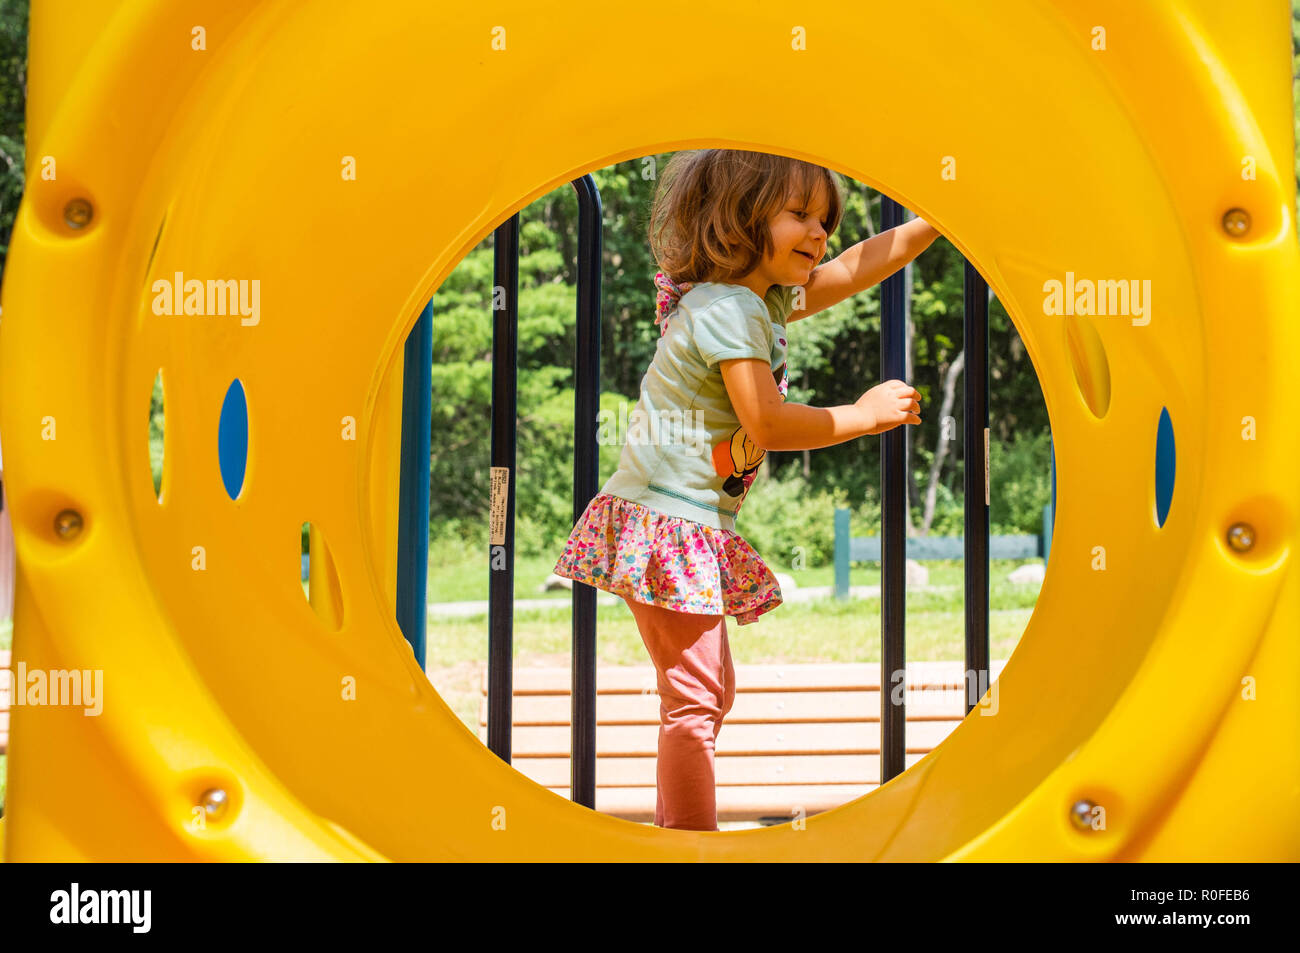 A 4-year old girl plays on playground equipment on a sunny summer day. Stock Photo